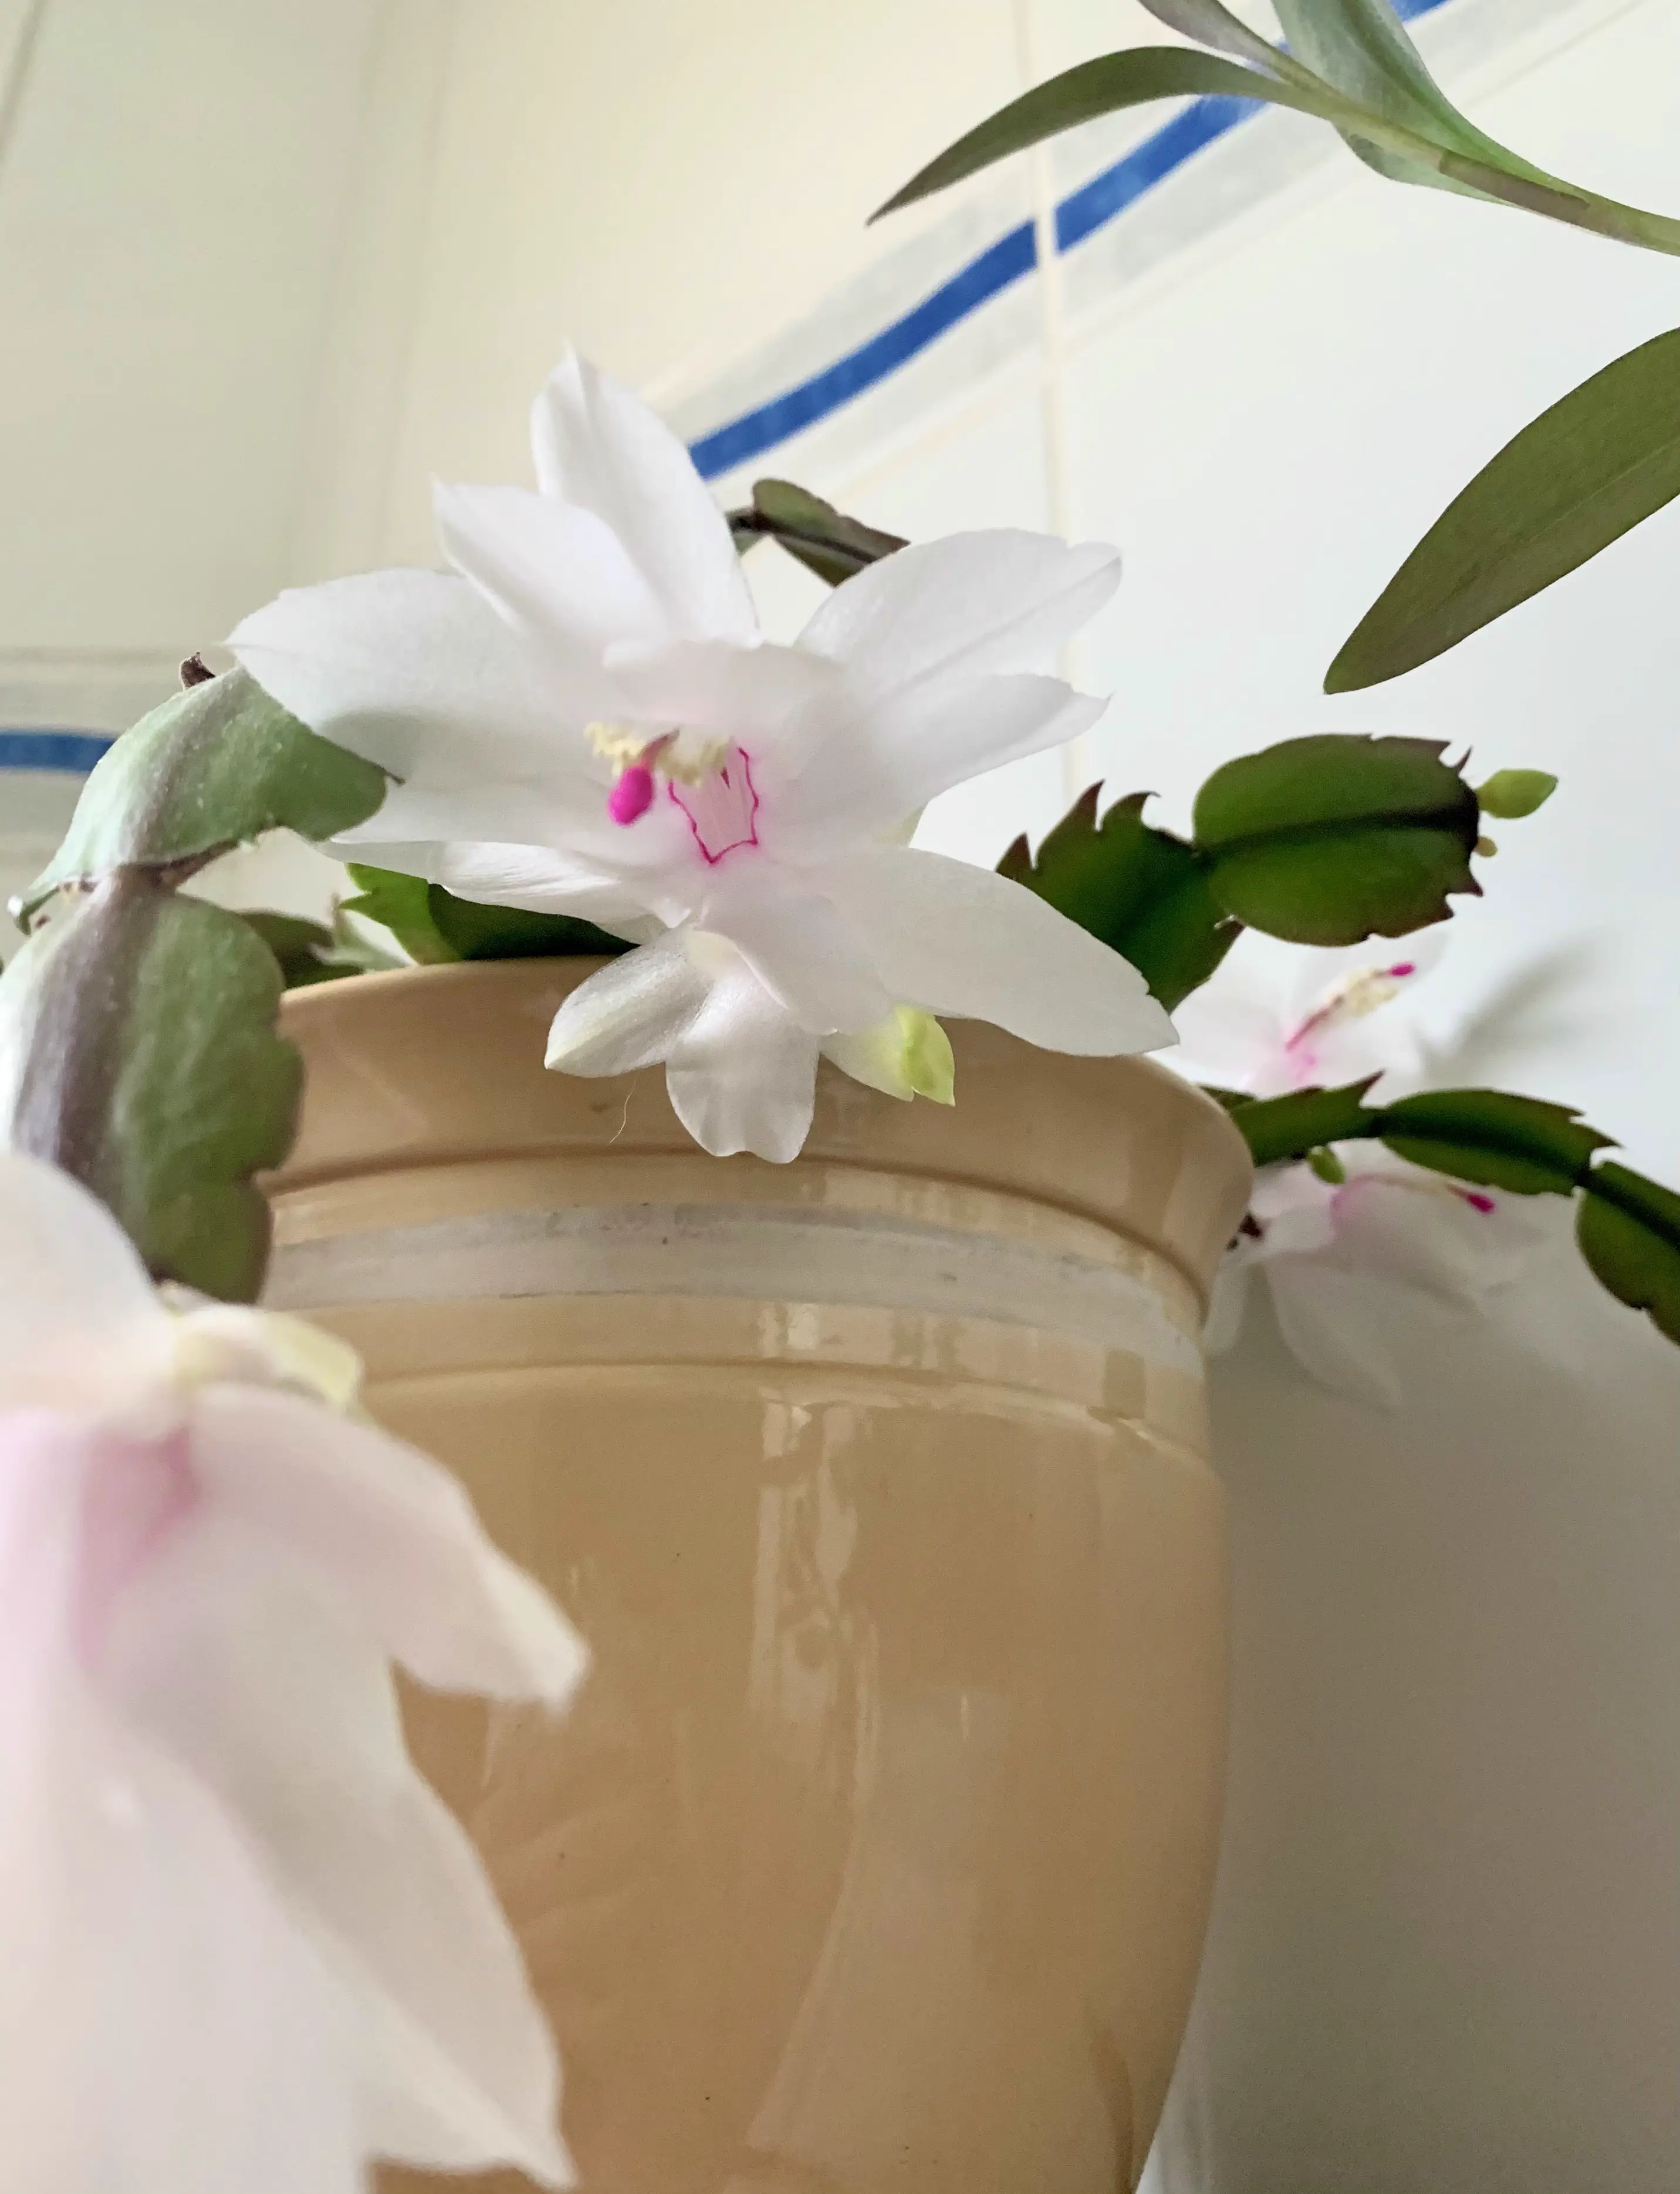 Christmas Cactus with blooming flowers